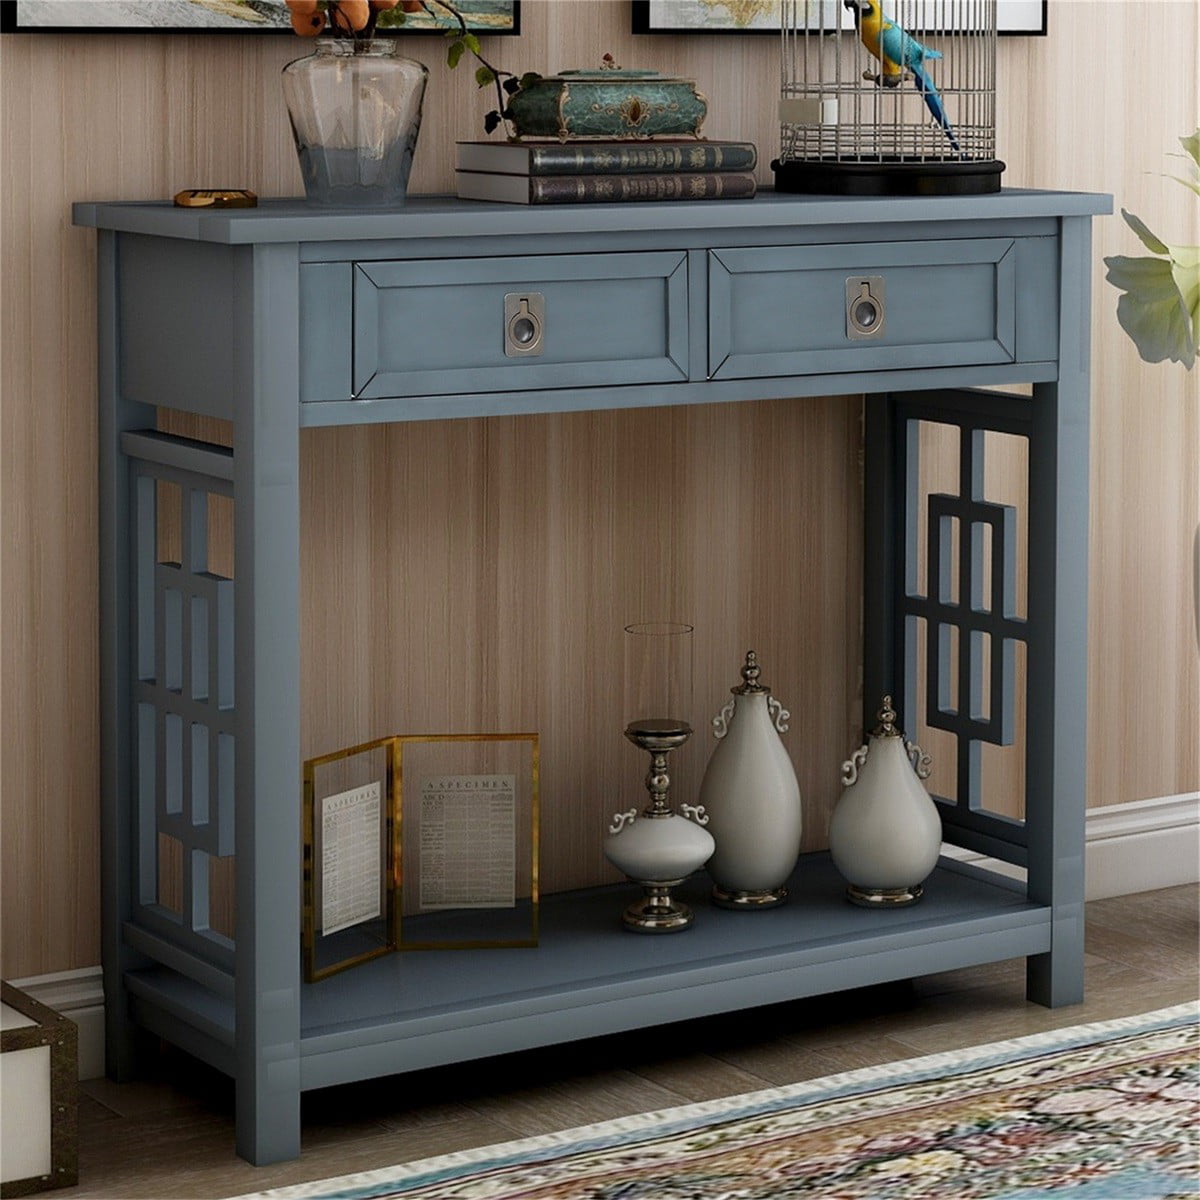 SENTERN Entryway Accent Console Table with 2 Drawers and Bottom Shelf